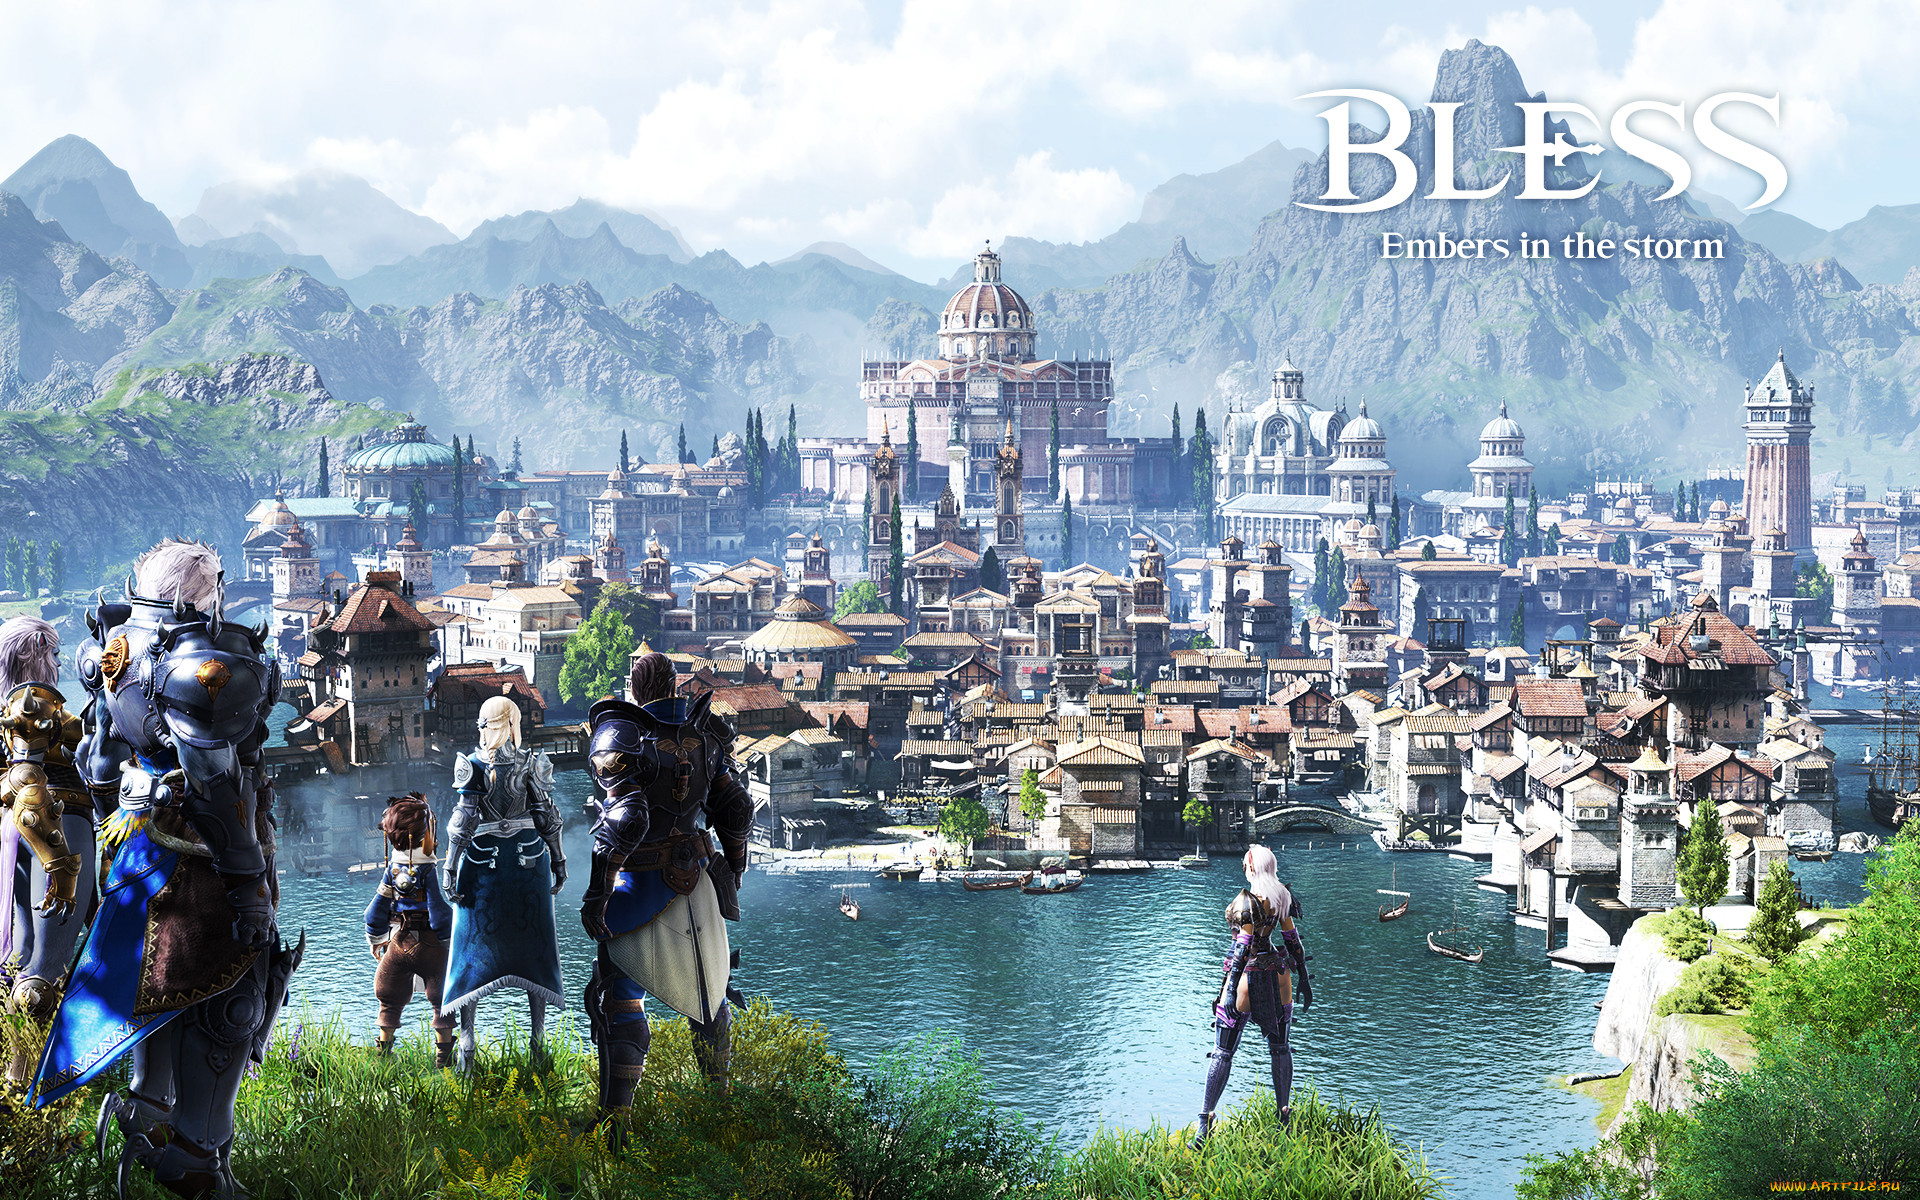  , bless online, , action, , bless, online